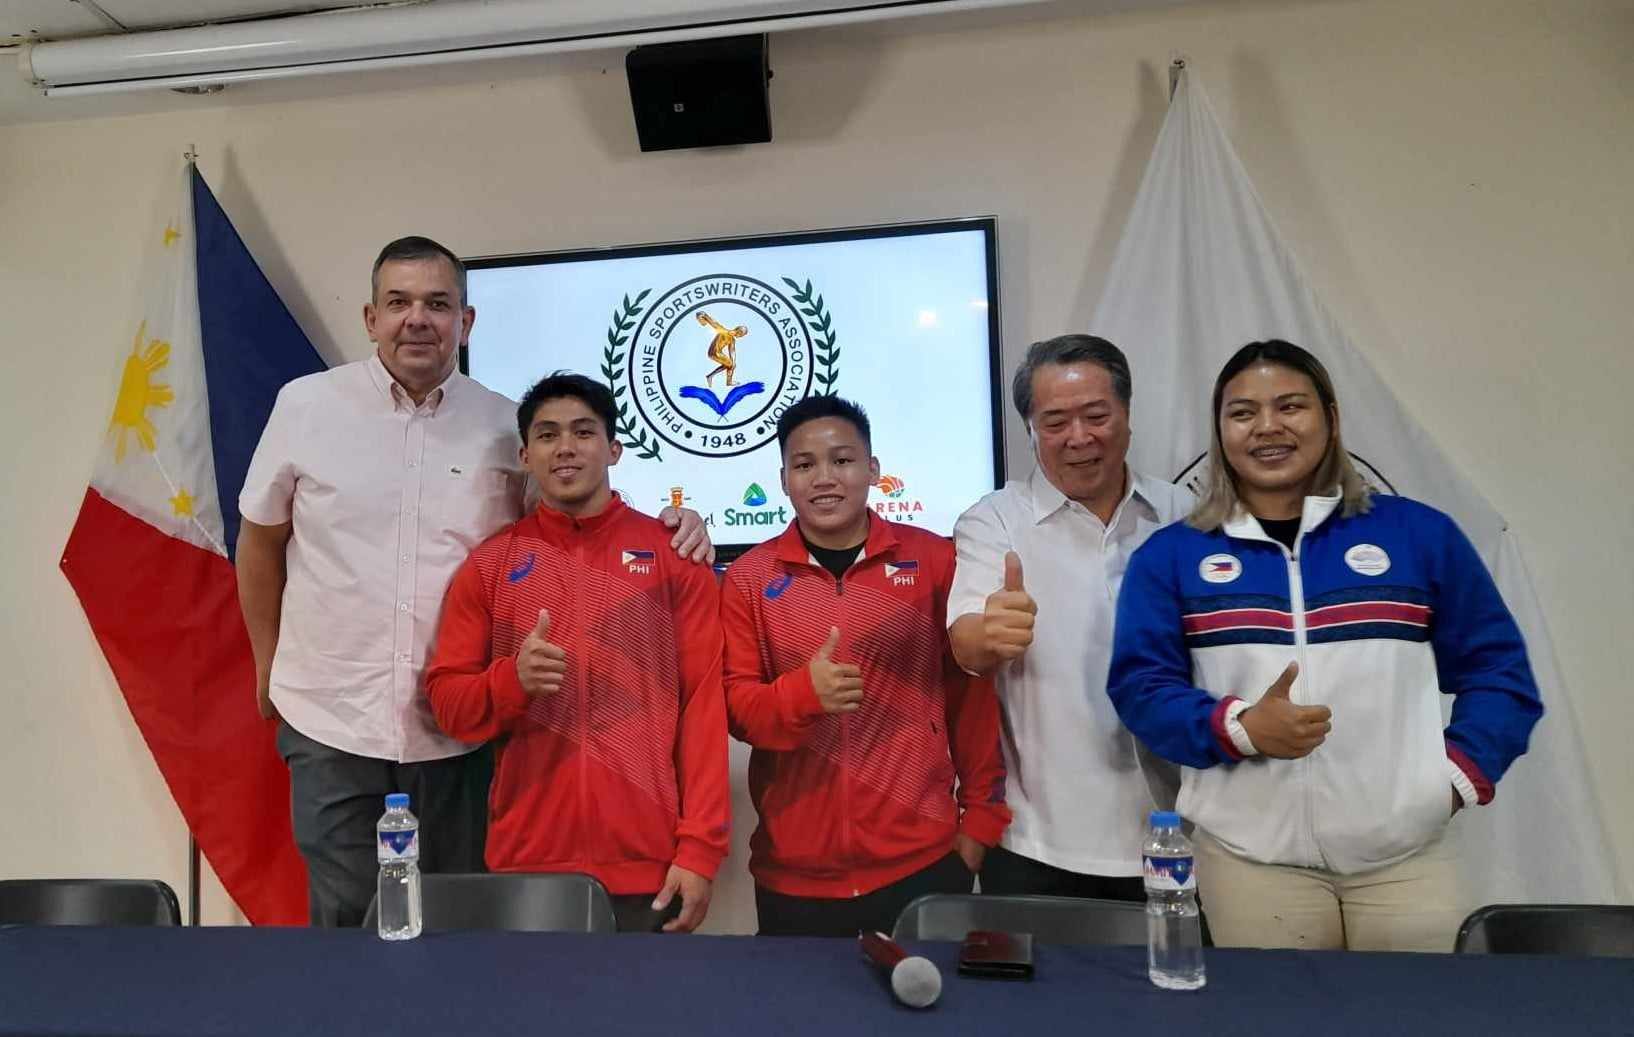 Hard feelings? China ‘lukewarm’ to training PH Olympian weightlifters ahead of Paris quest